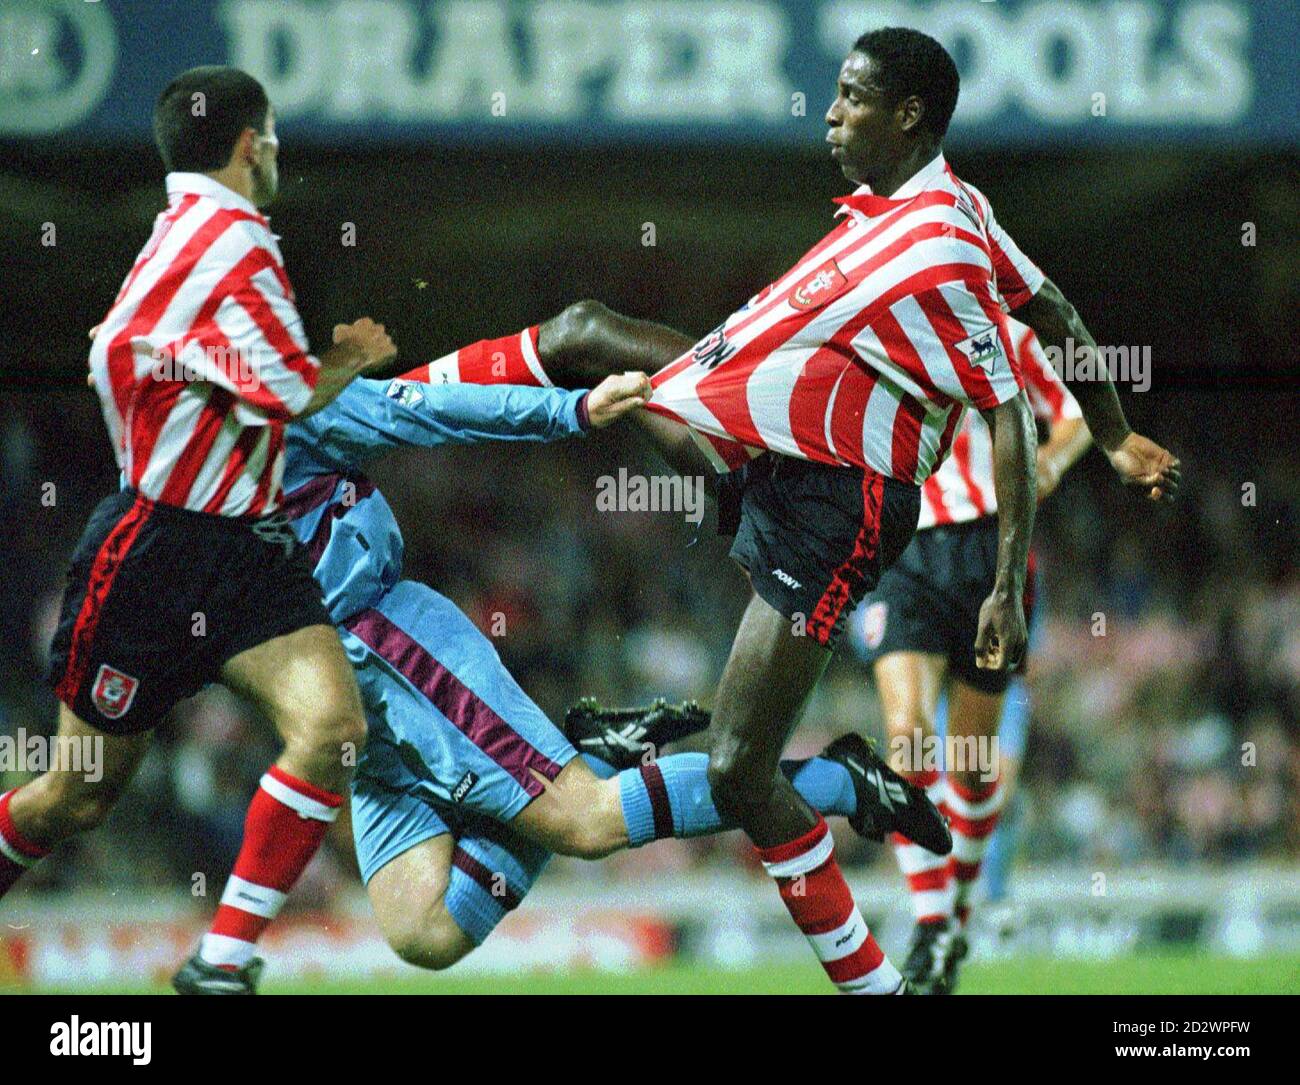 Southampton's Ken Monkou kicks out at West Ham United's Ian Dowie as he tugs at his shirt during the FA Carling Premiership match at The Dell.  Stock Photo